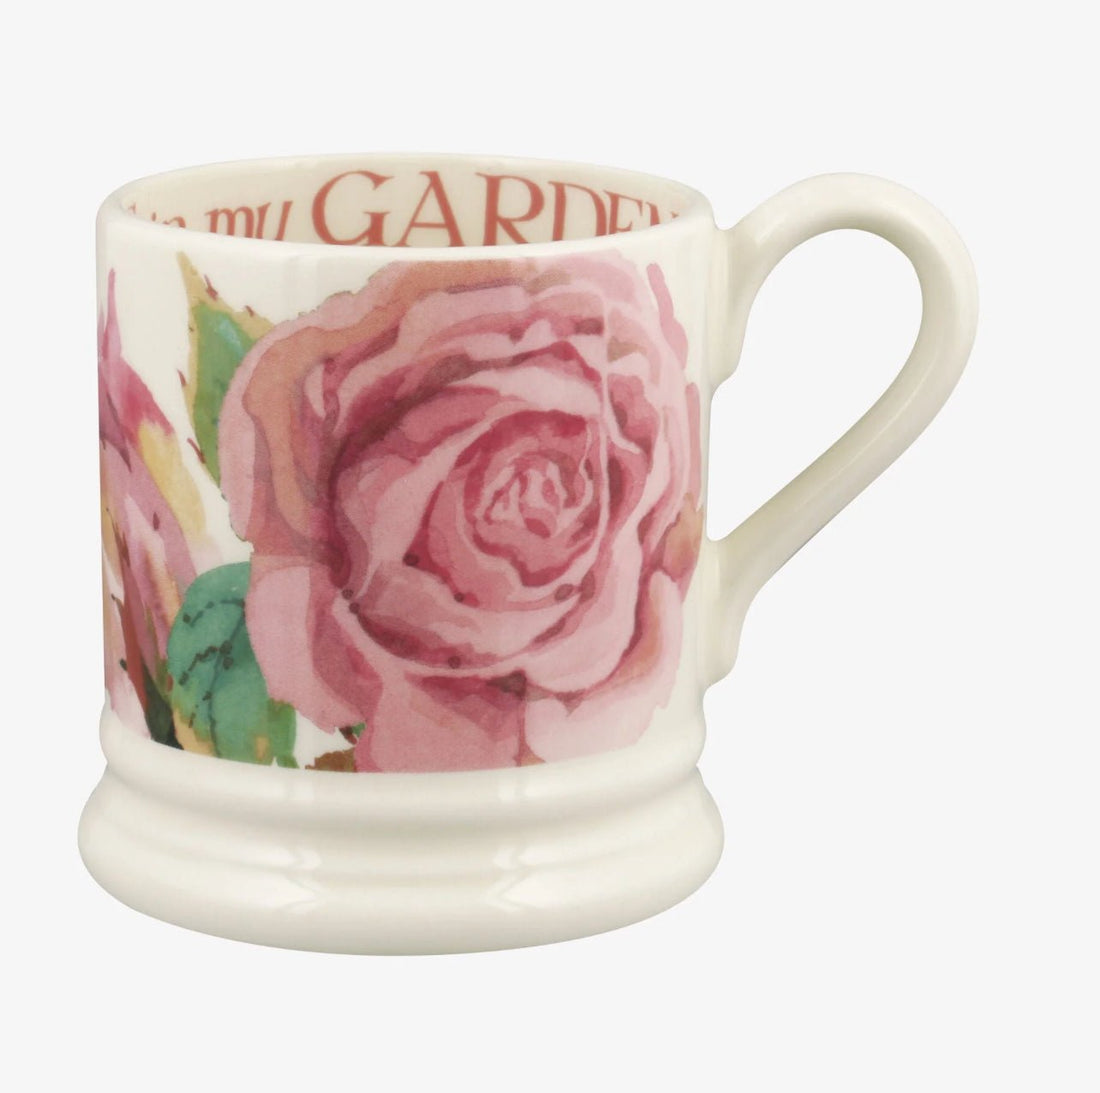 Emma Bridgewater Roses All my Life - Roses in My Garden ½ Pint Mug - The Flower Crate